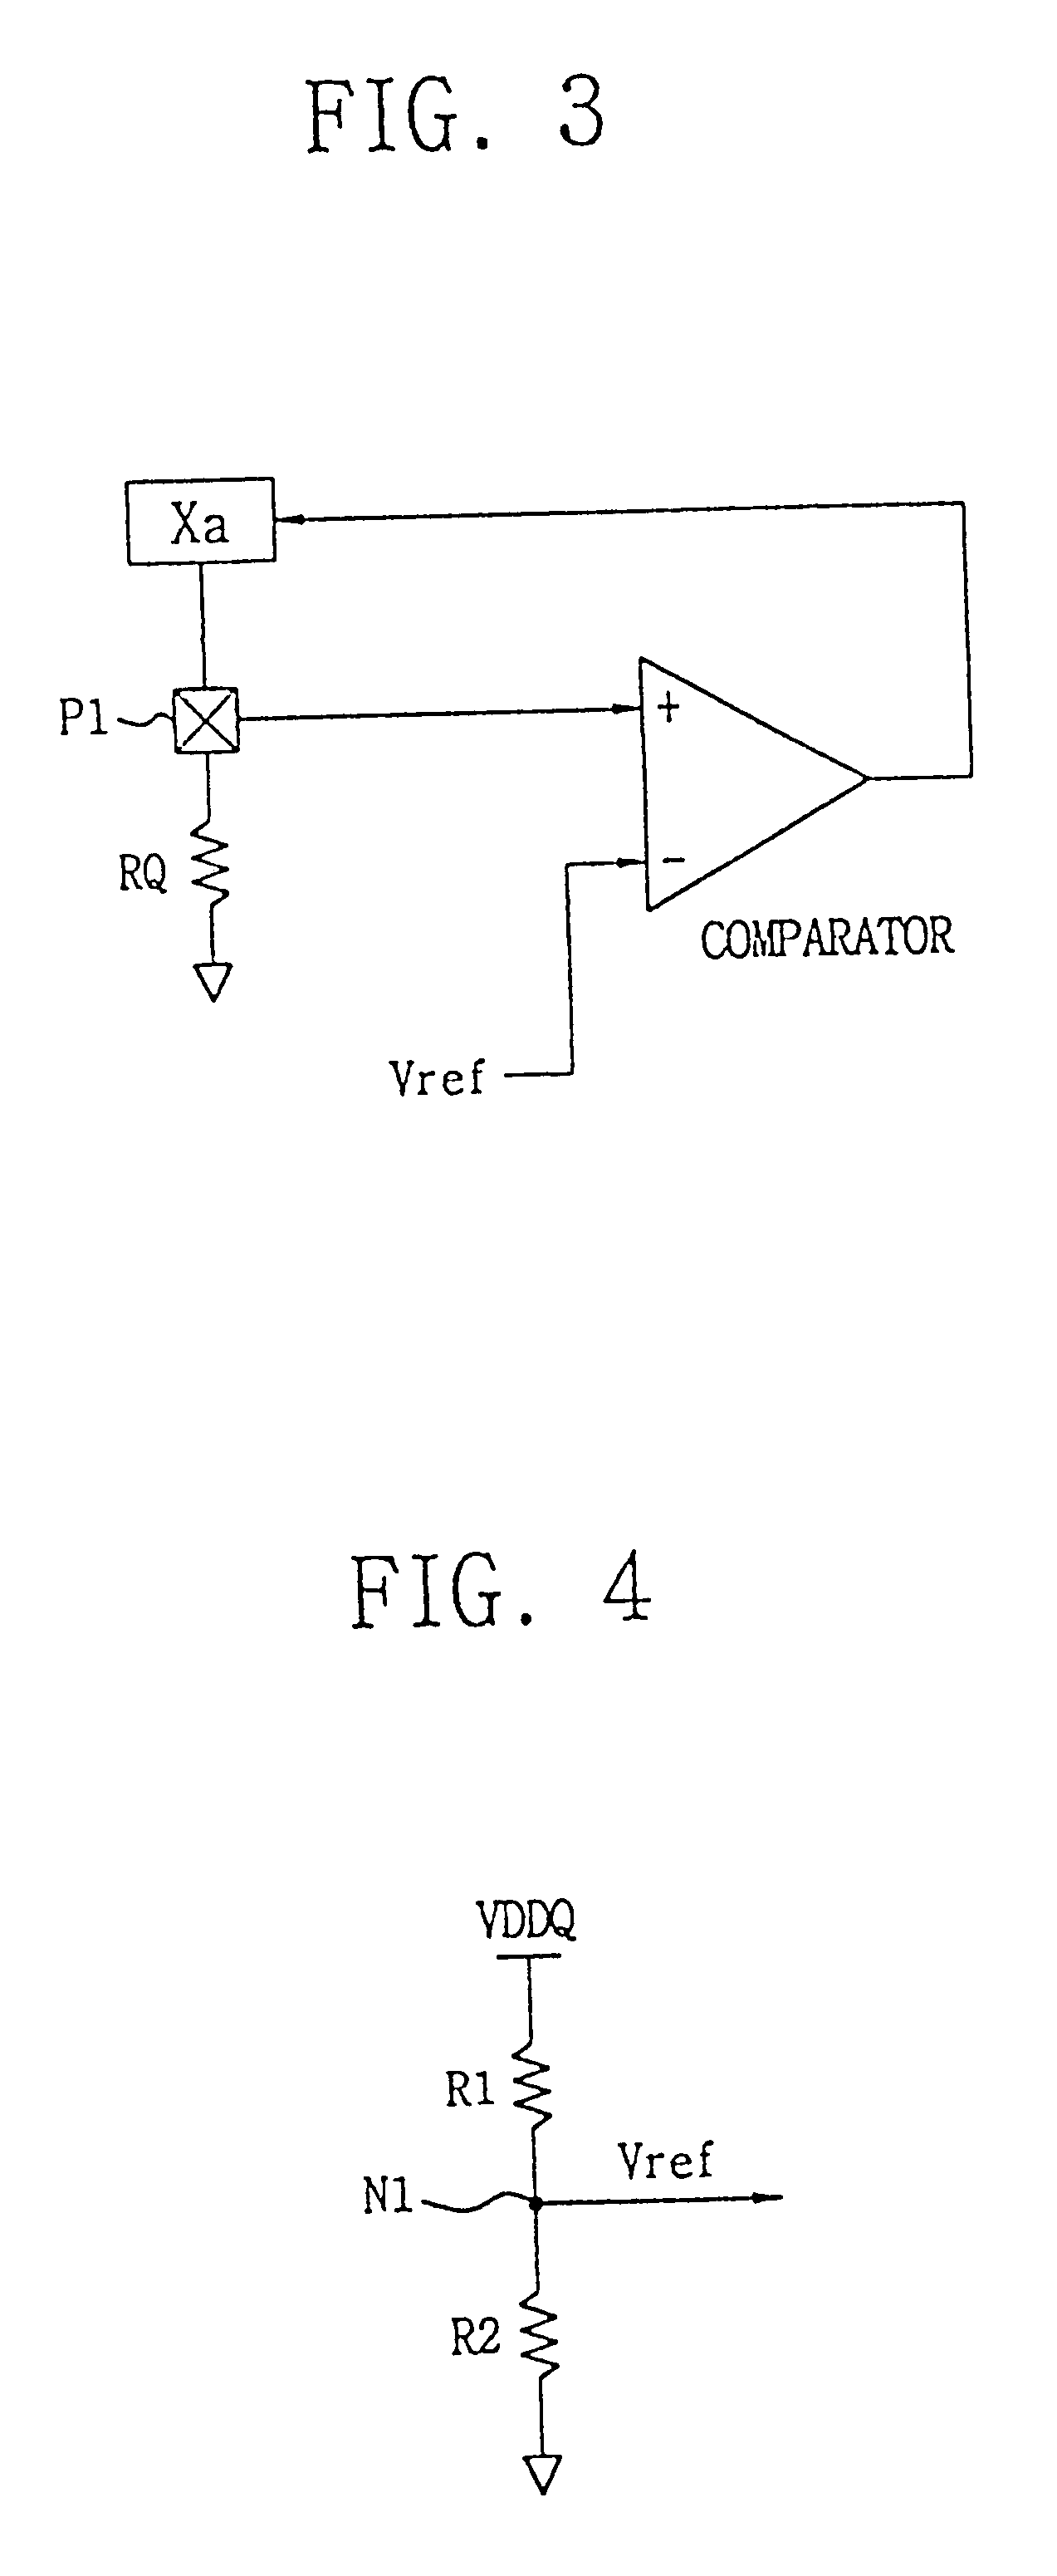 Programmable impedance control circuit